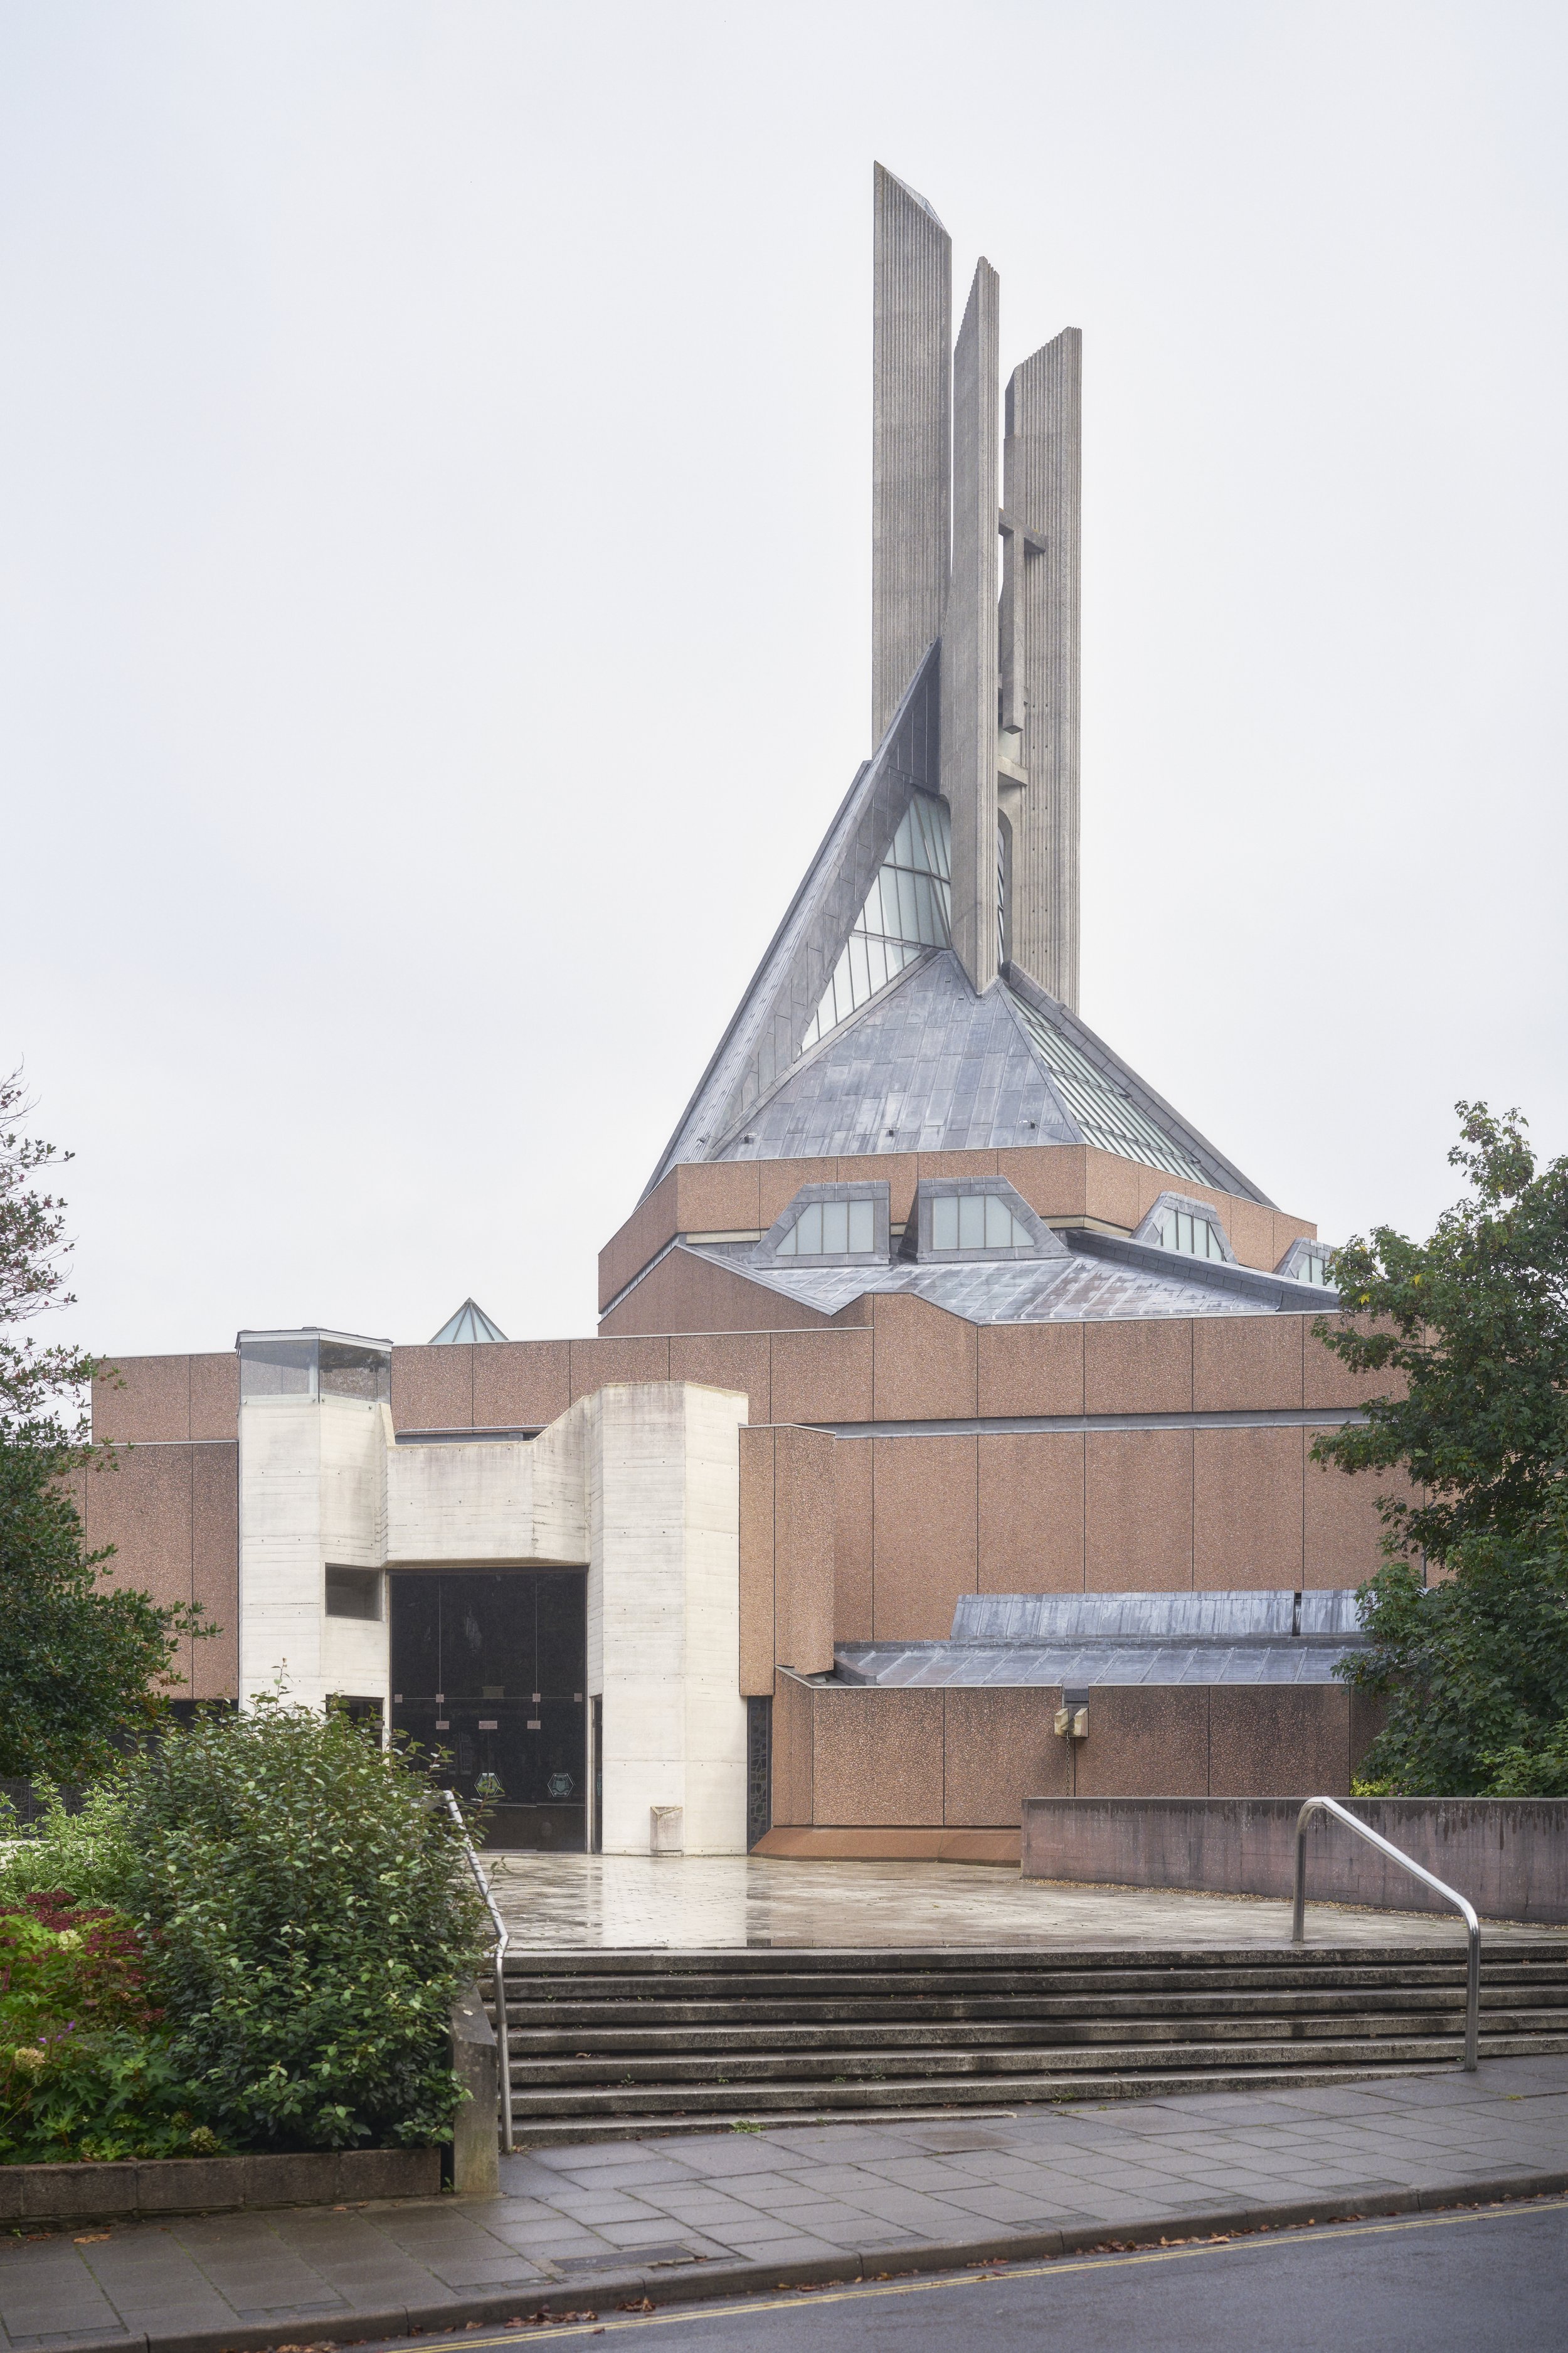   Clifton Cathedral  by R. Weeks, F.S. Jennett and A. Poremba of  Percy Thomas Partnership . Completed in 1973. 